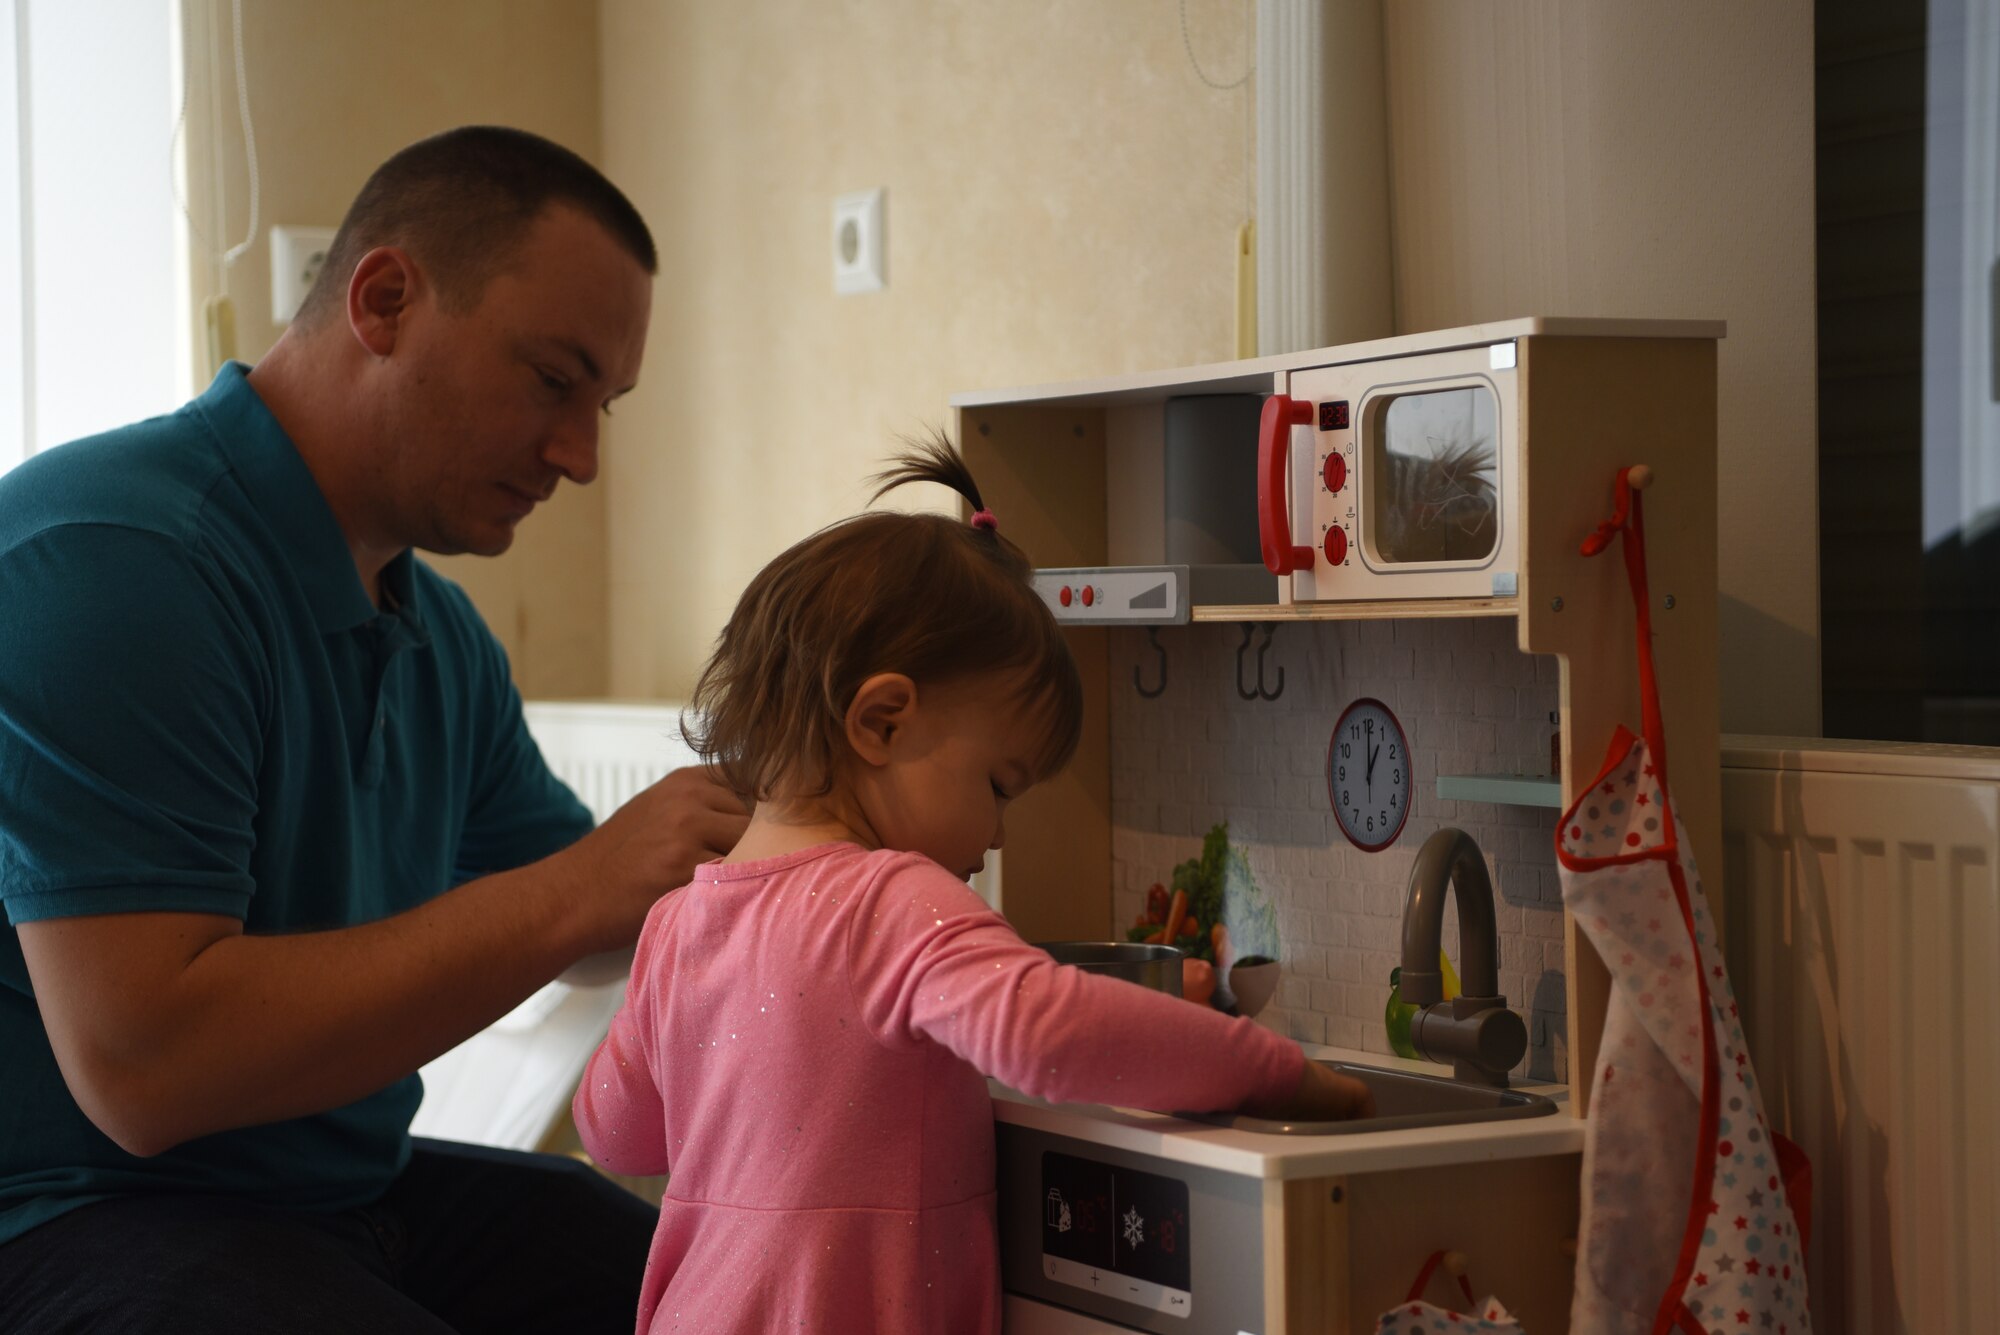 U.S. Air Force Tech. Sgt. Edwin Bowser, 569th U.S. Forces Police Squadron flight sergeant, plays alongside his daughter Elsie, in their home.